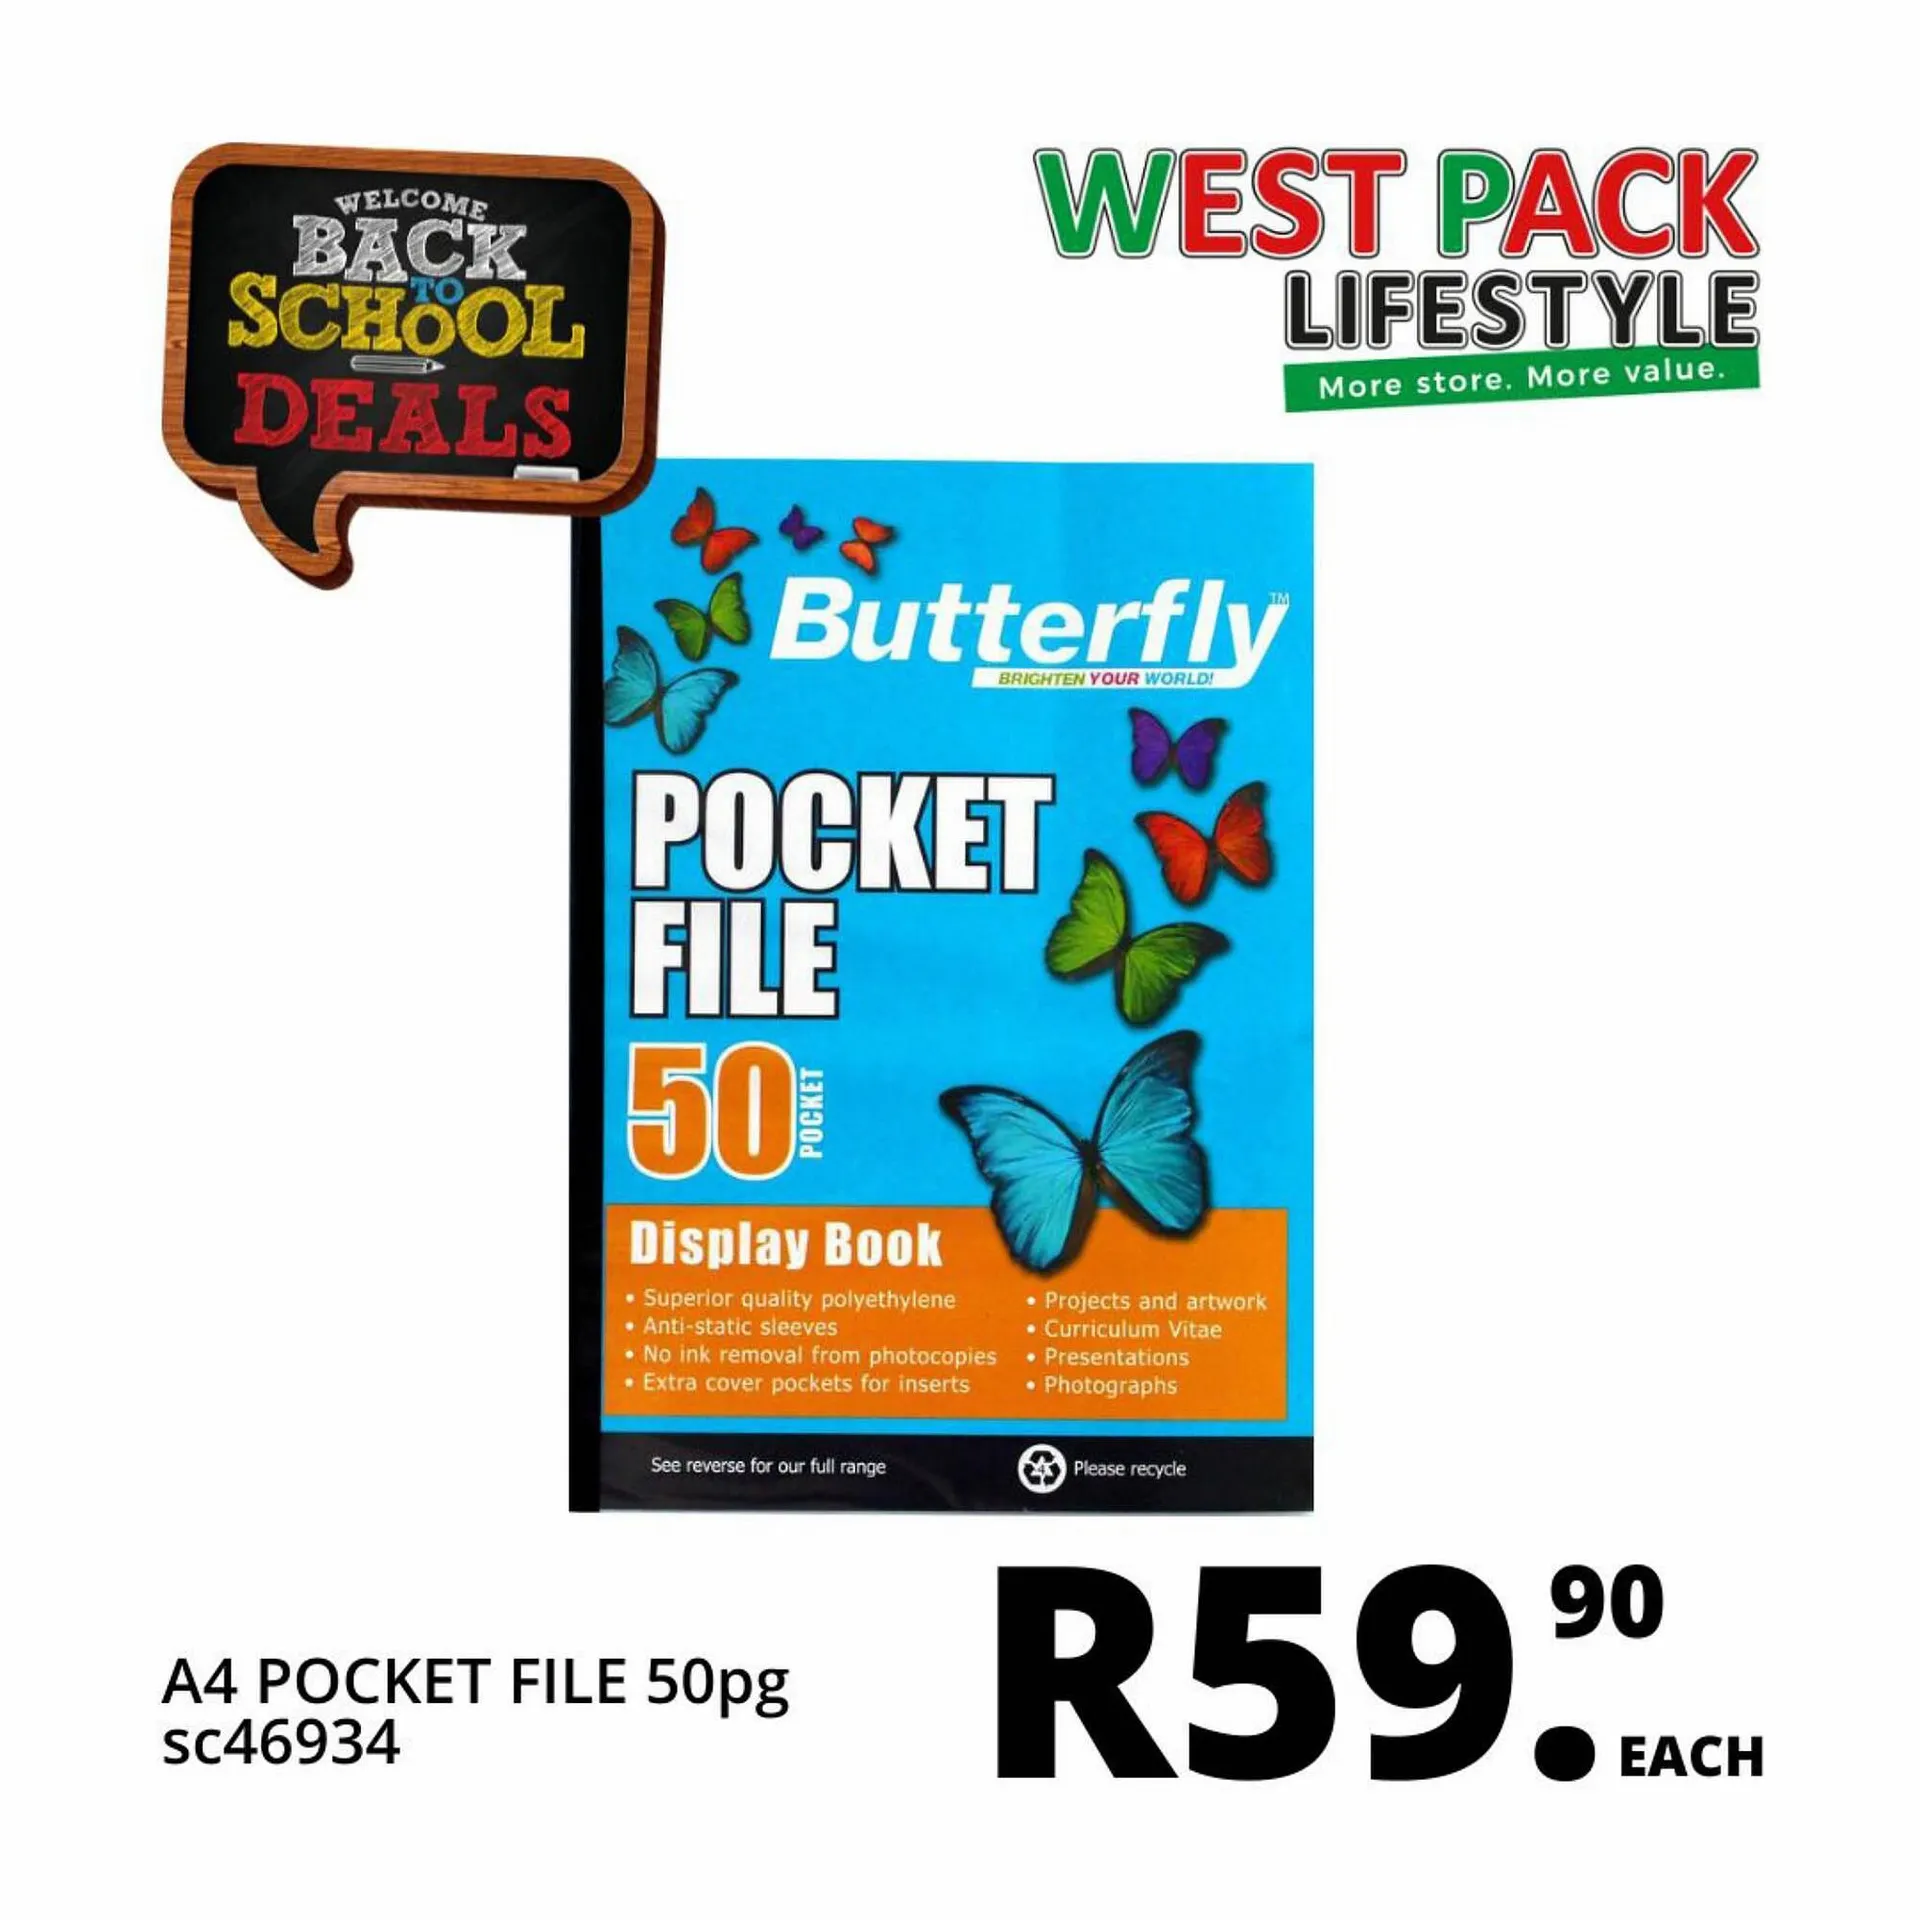 West Pack Lifestyle catalogue - 2